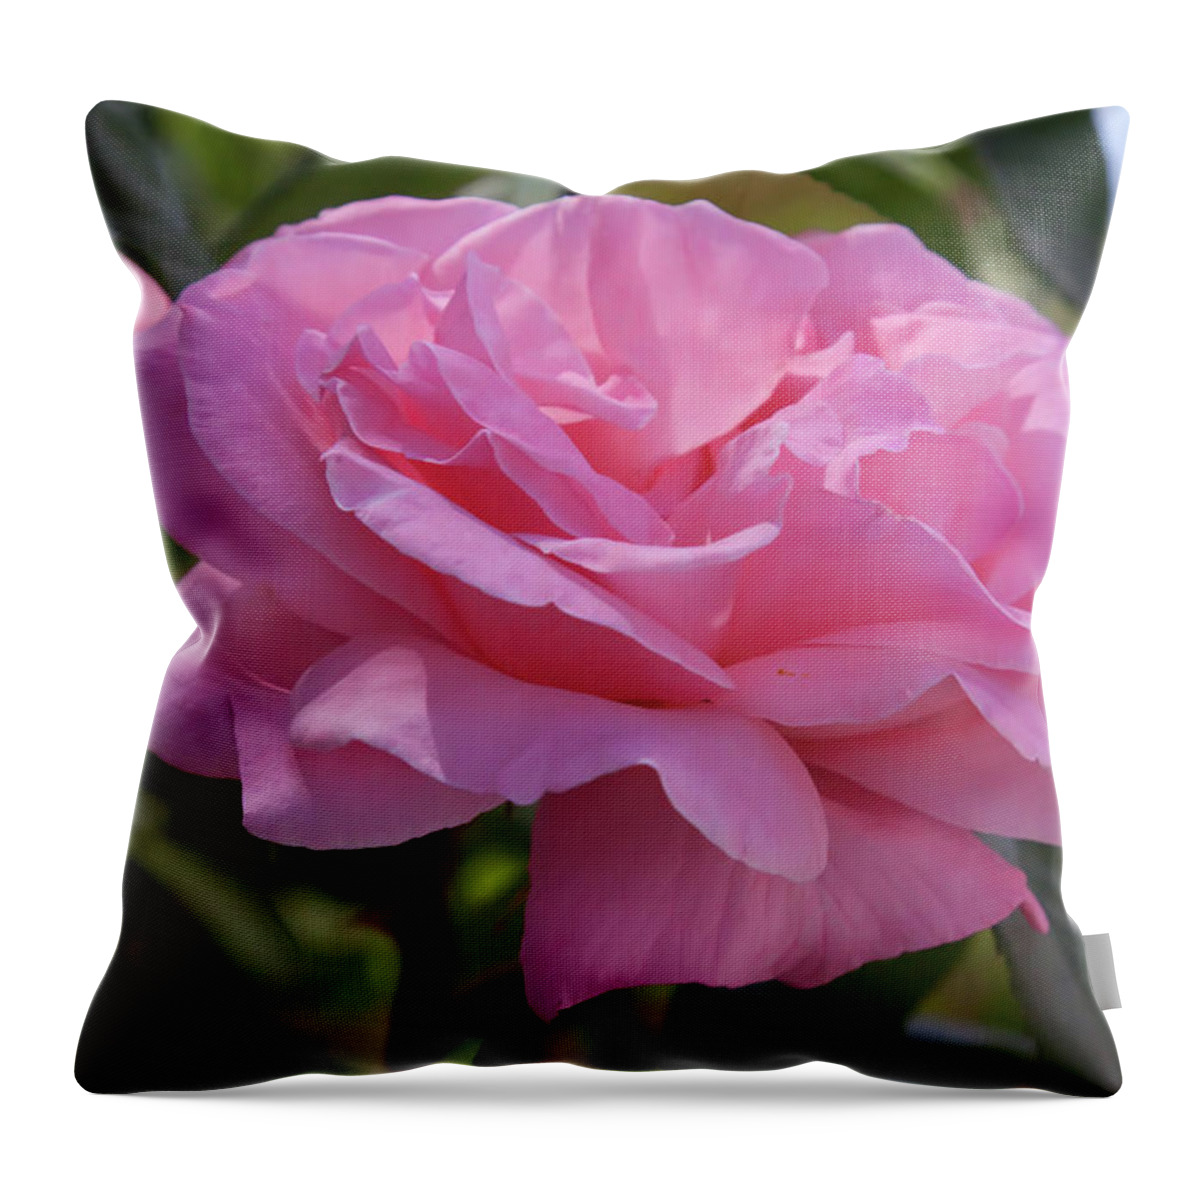 Pink Rose Throw Pillow featuring the photograph Spanish Pink Rose by Tatiana Travelways